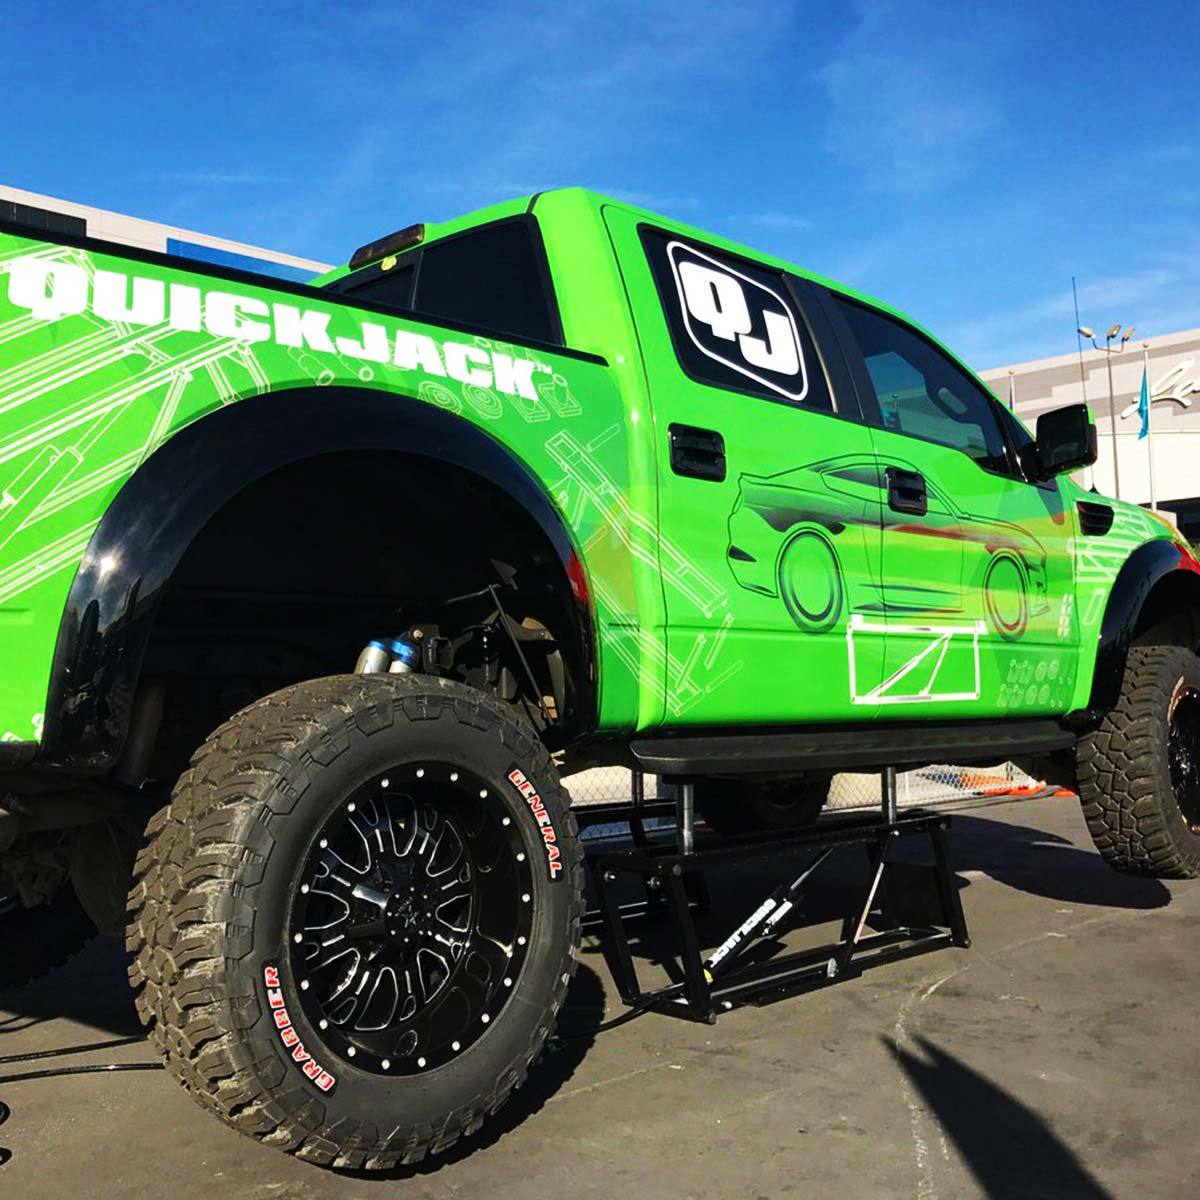 Image of green pickup with QuickJack logo lifted outside